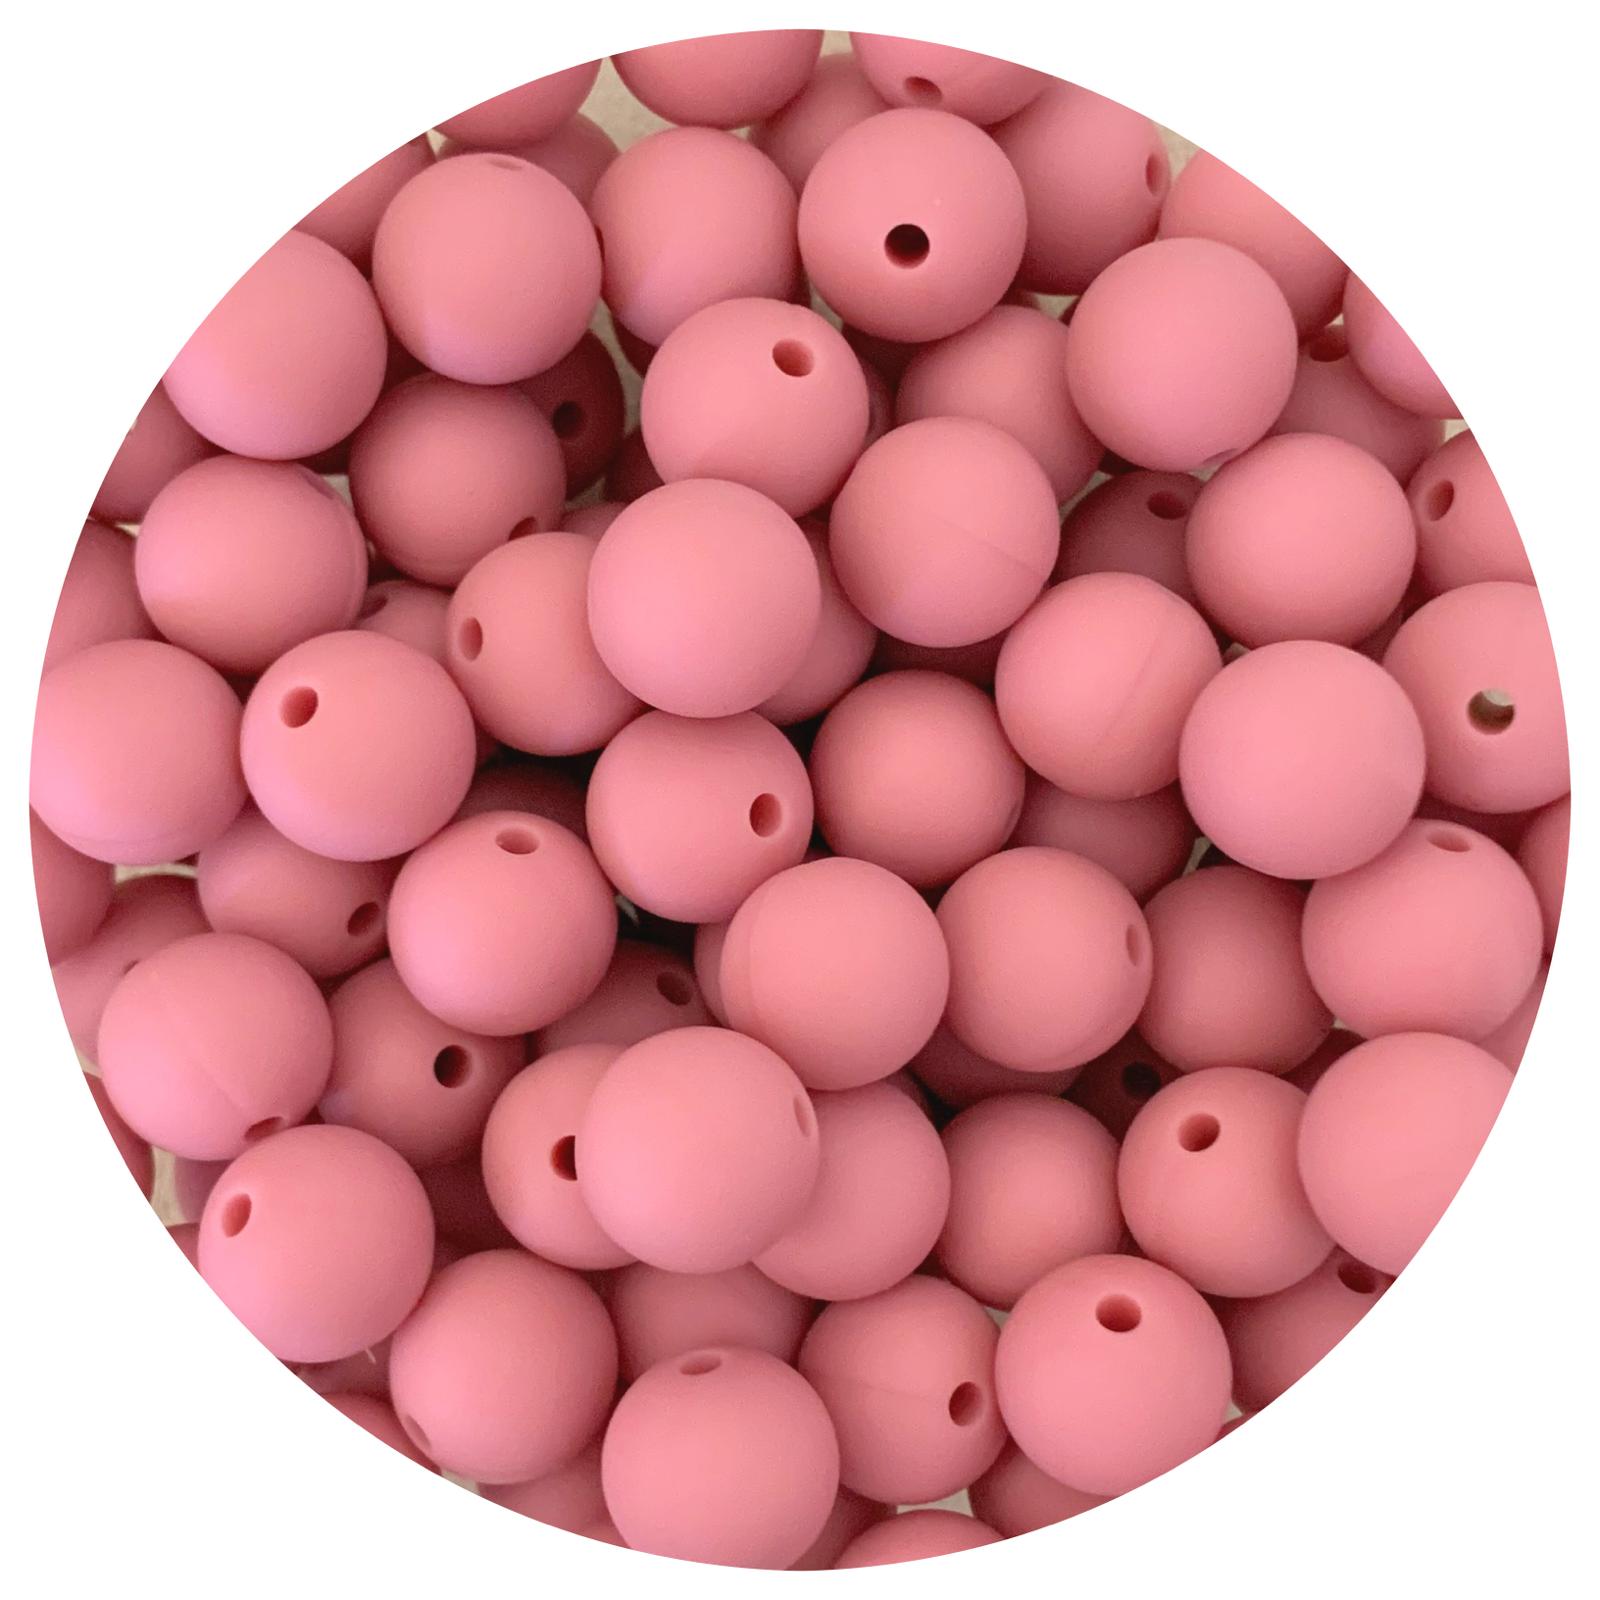 Petal Pink - 12mm Round Silicone Beads - 10 beads